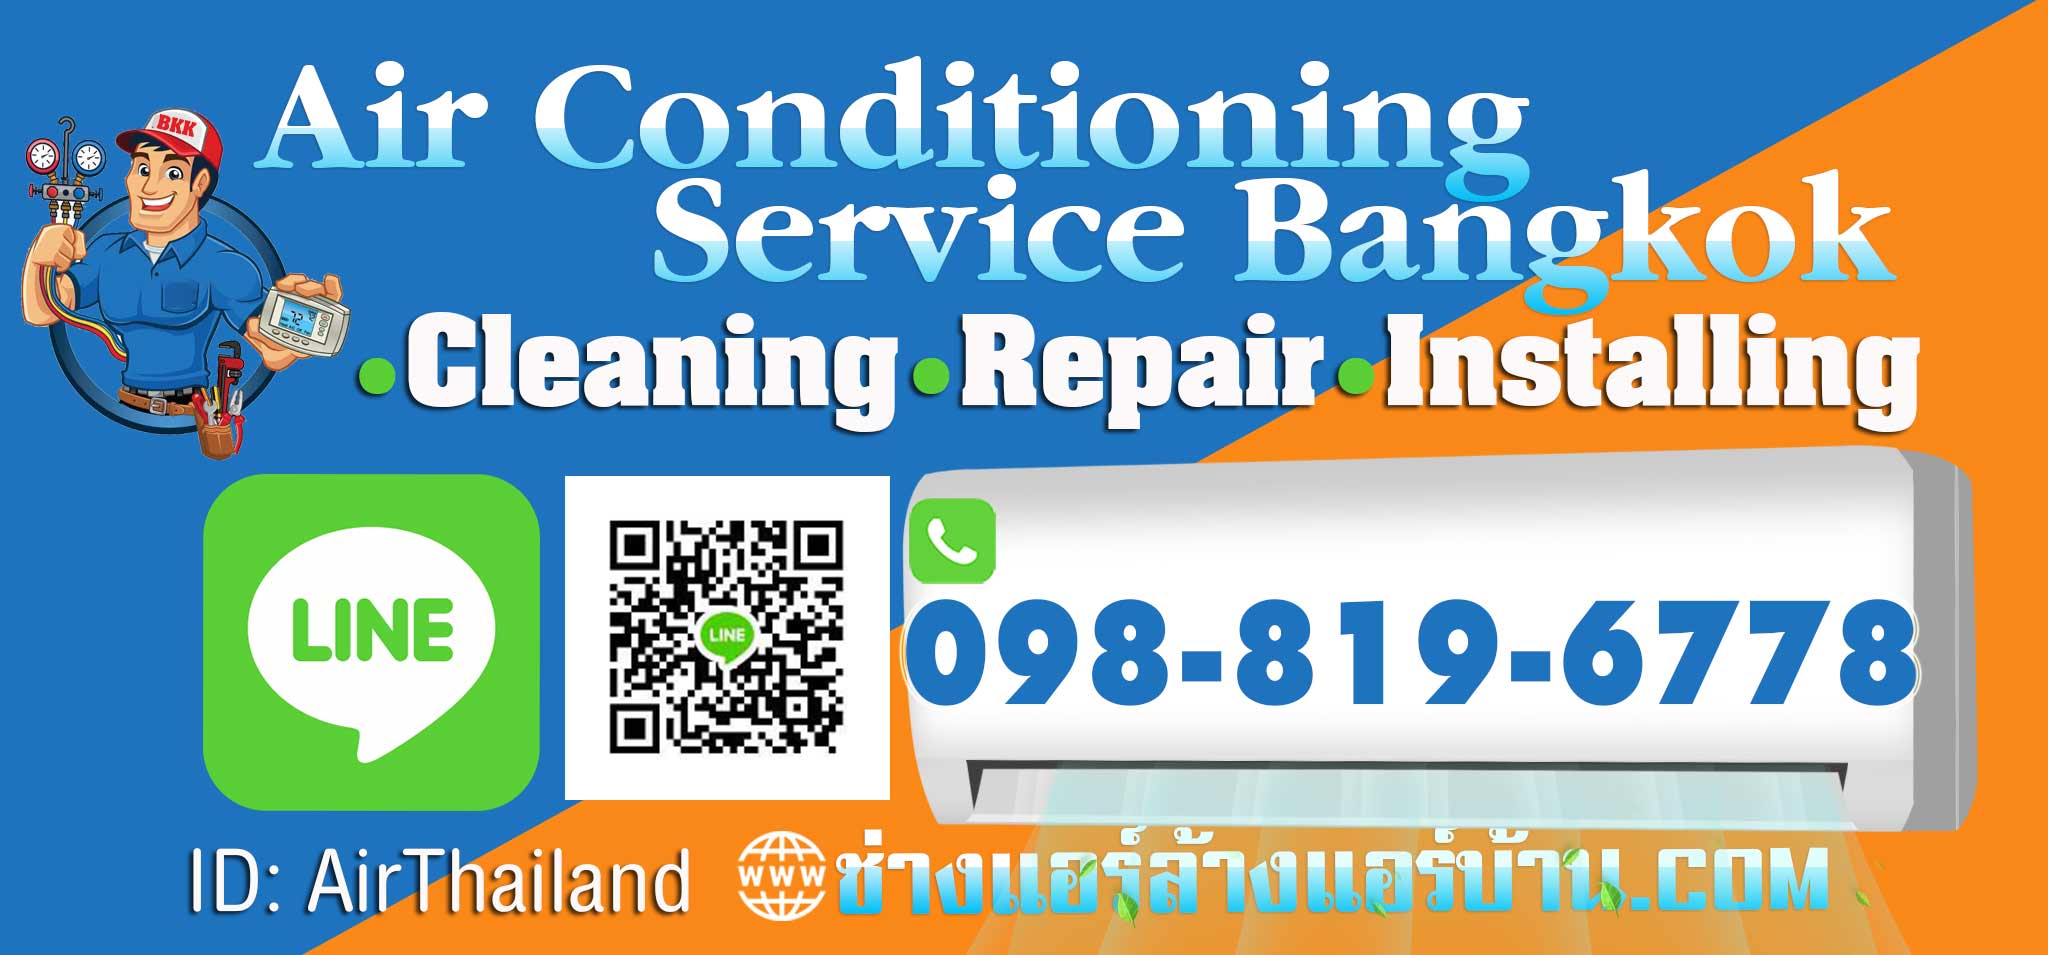 Air Conditioning Cleaning Service in Bangkok by air conditioning technician